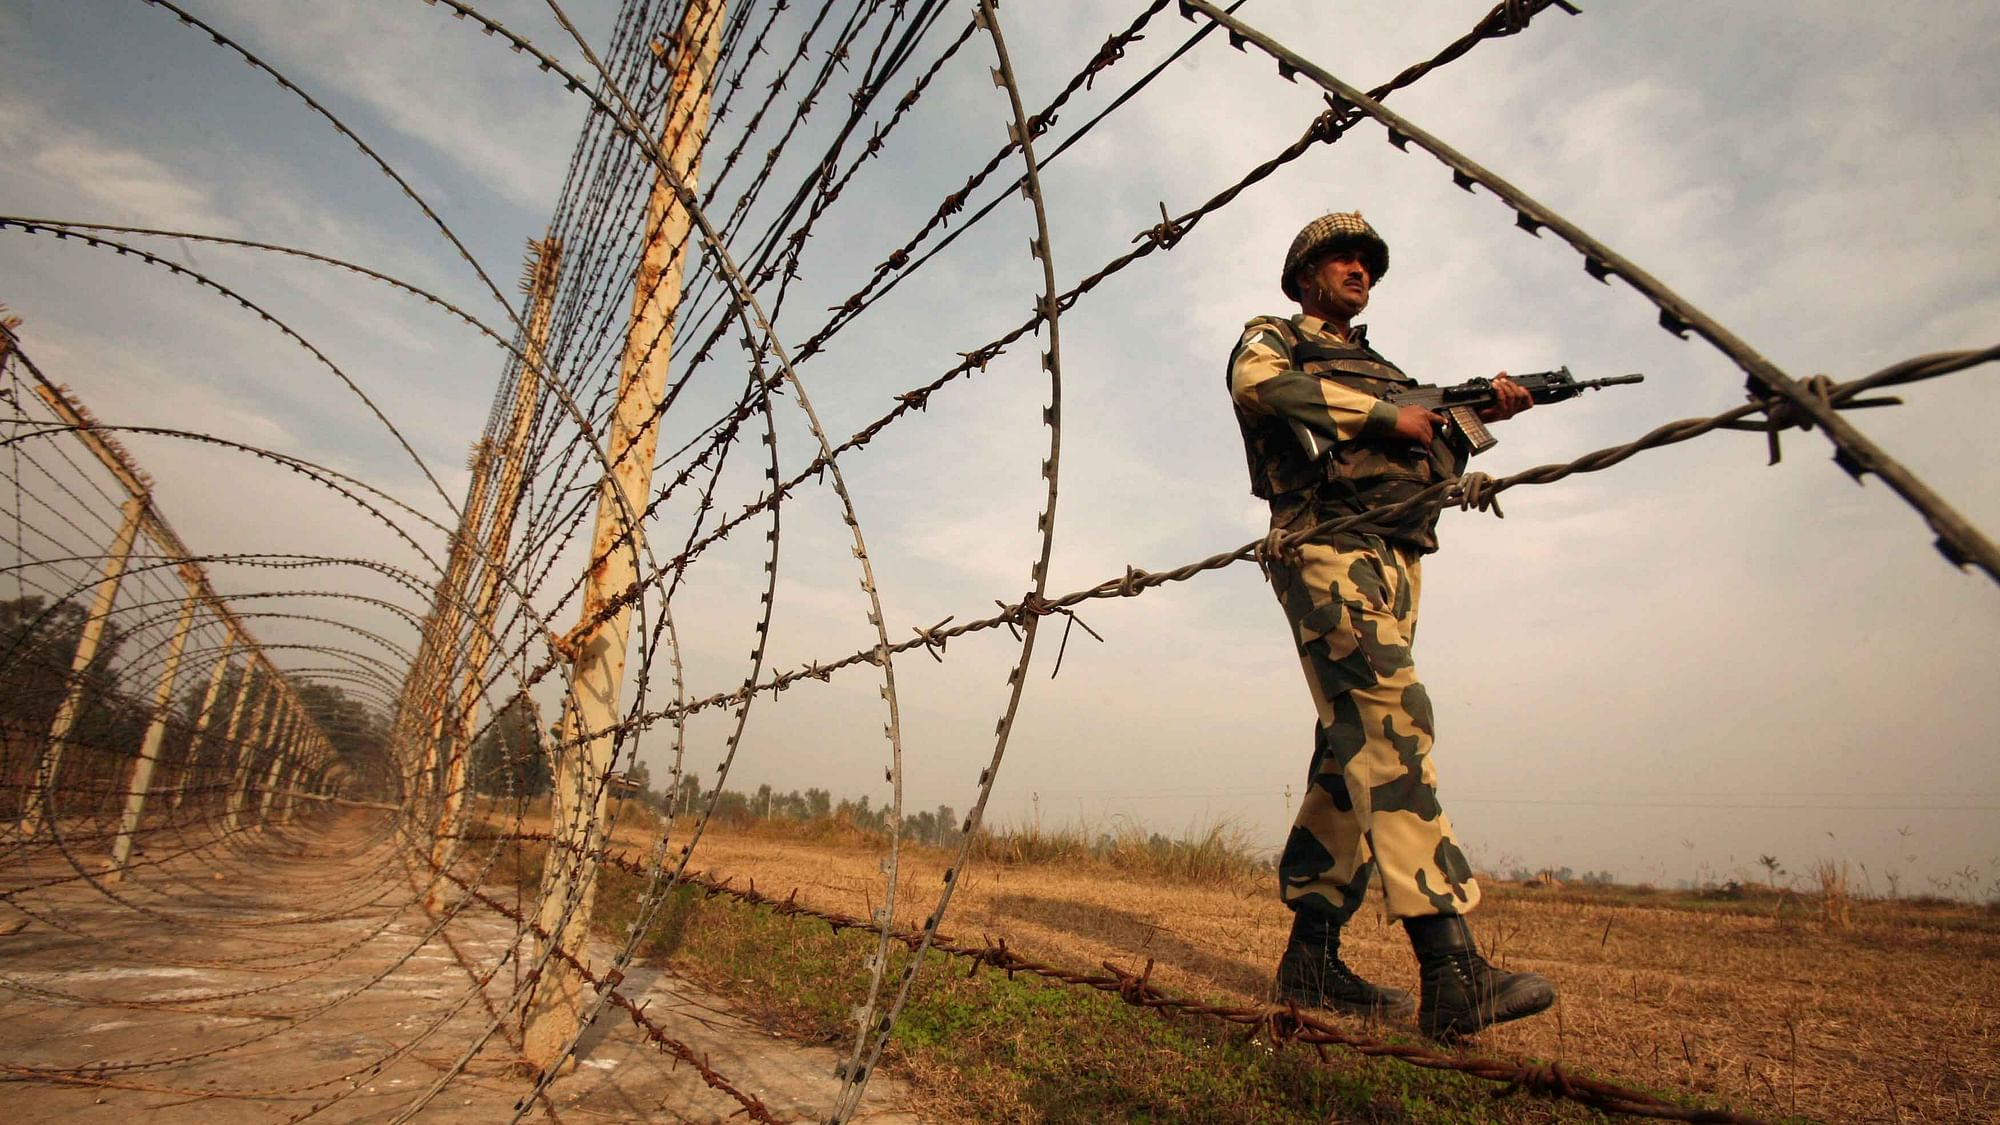 An Indian Border Security Force (BSF) soldier patrols near the fenced border with Pakistan in Suchetgarh, southwest of Jammu. (Photo: Reuters)